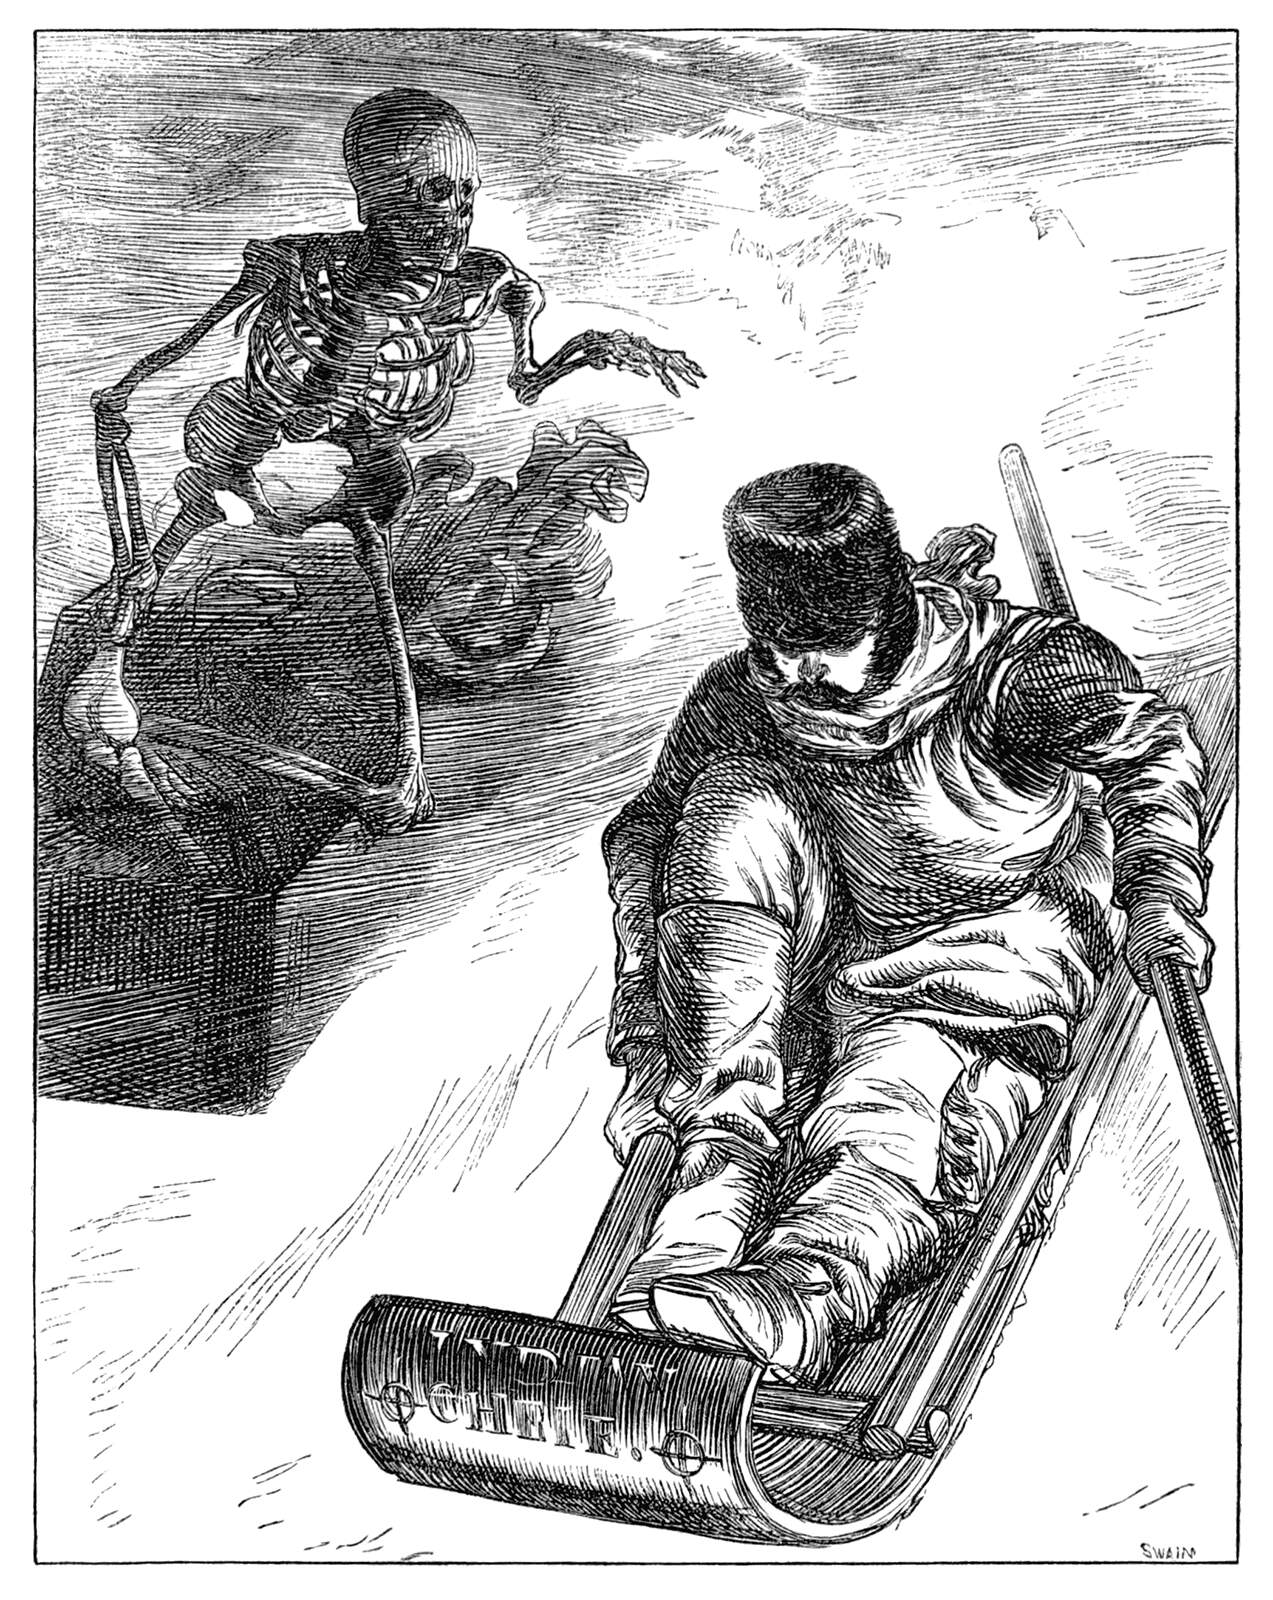 A skeleton pursues a man on a bobsled